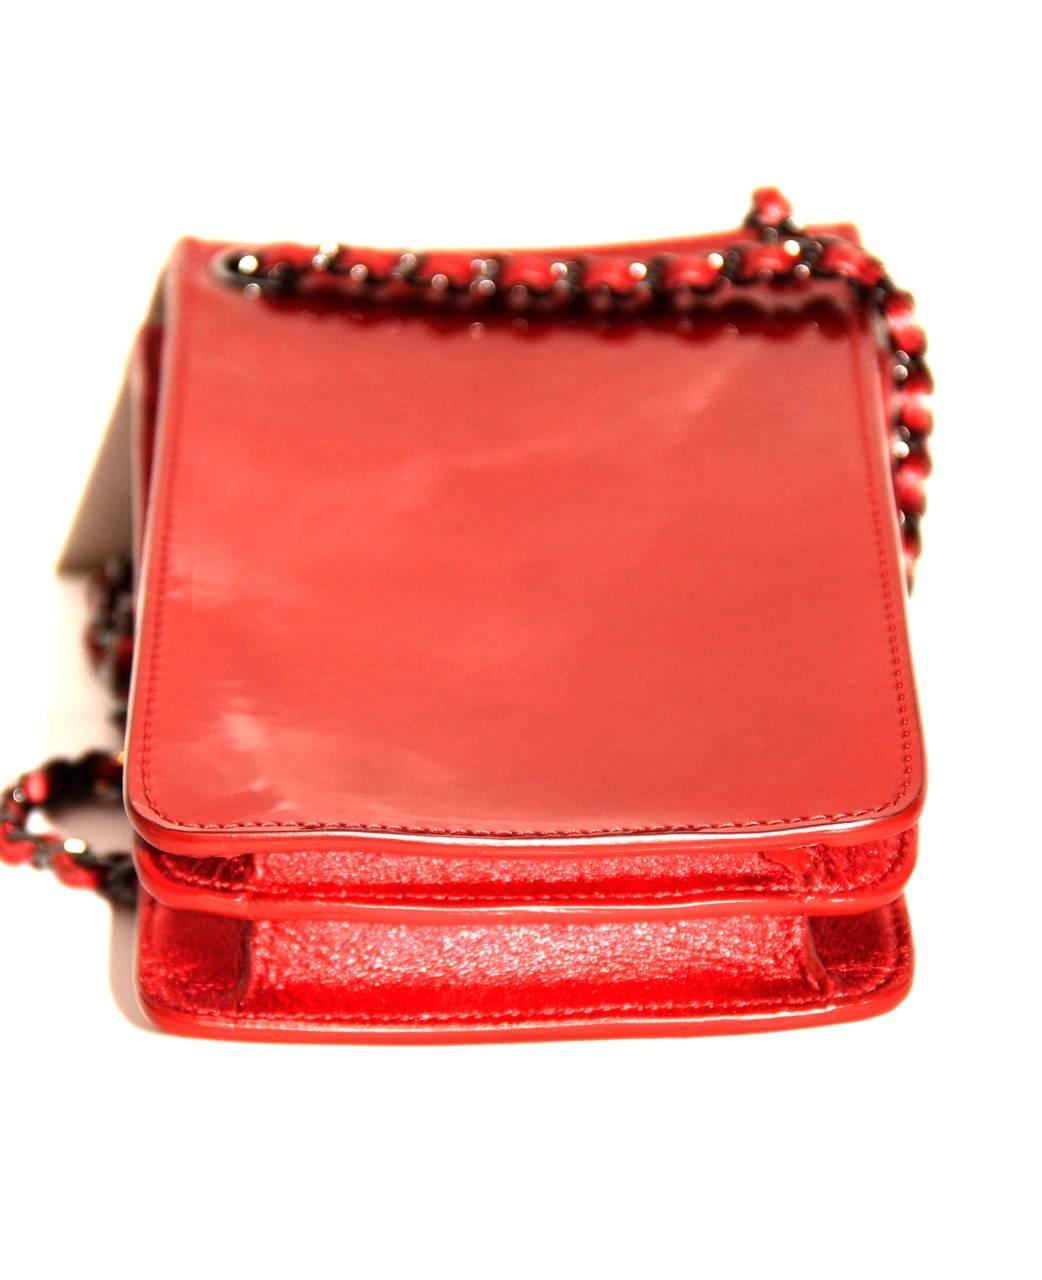 Fun and a must-have Chanel tech accessories: crossbody smartphone case bag.

Collection: 2014
Leather: Patent leather
Color: Red
Hardware: Silver-tone
Interior: Three compartments, grey cloth lining
Measurements: Length 10 cm x Height 15.5 cm x